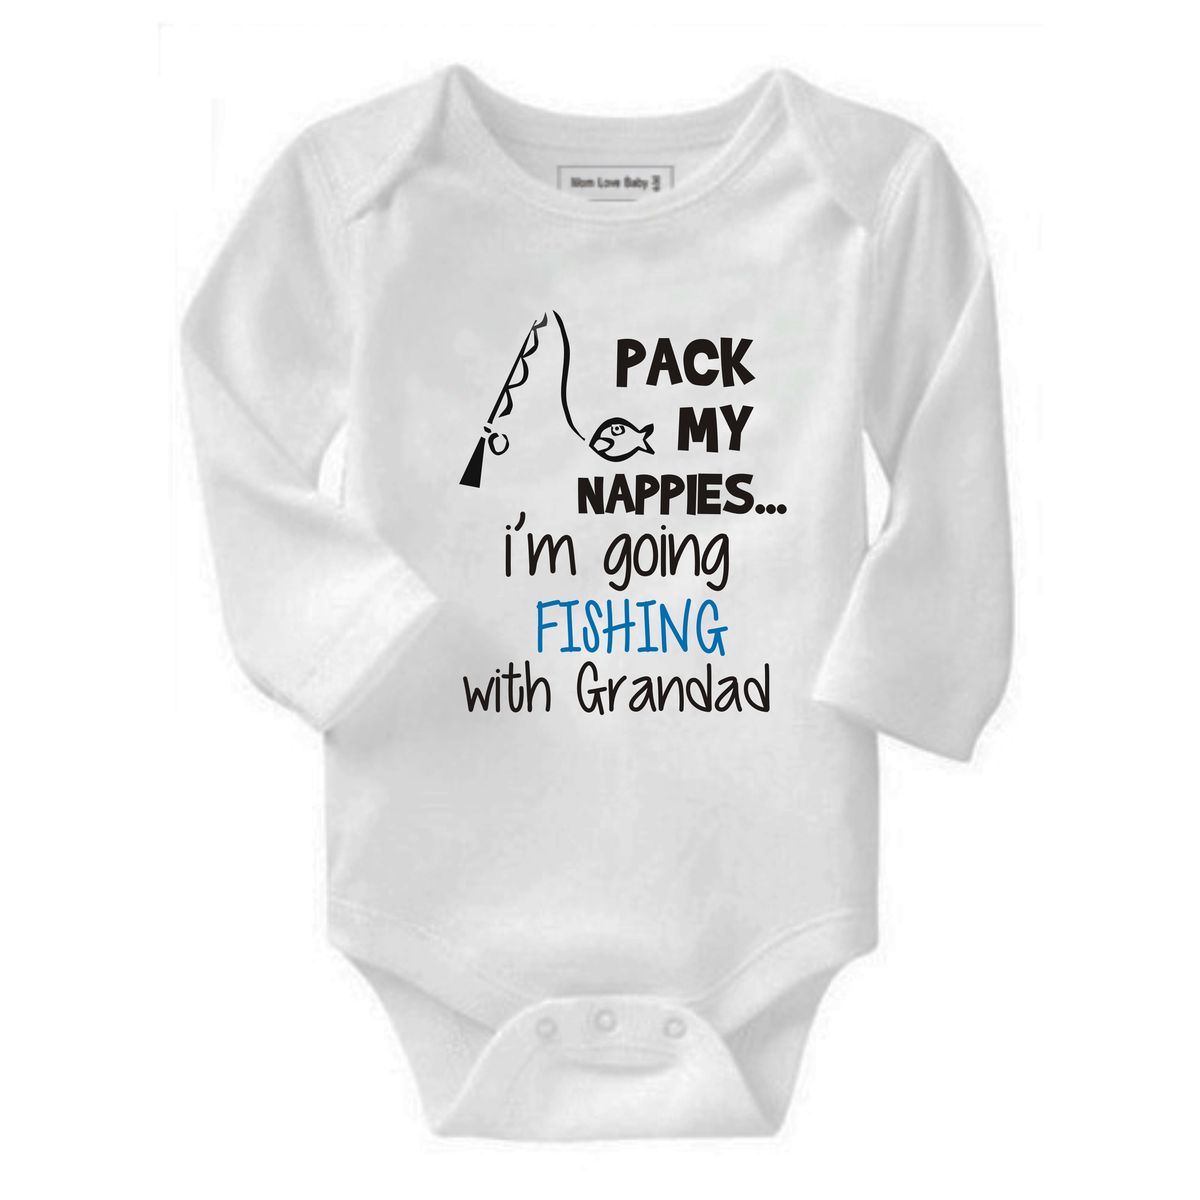 Funny Baby Grows-Printed-I'm Going Fishing With My Uncle-Novelty